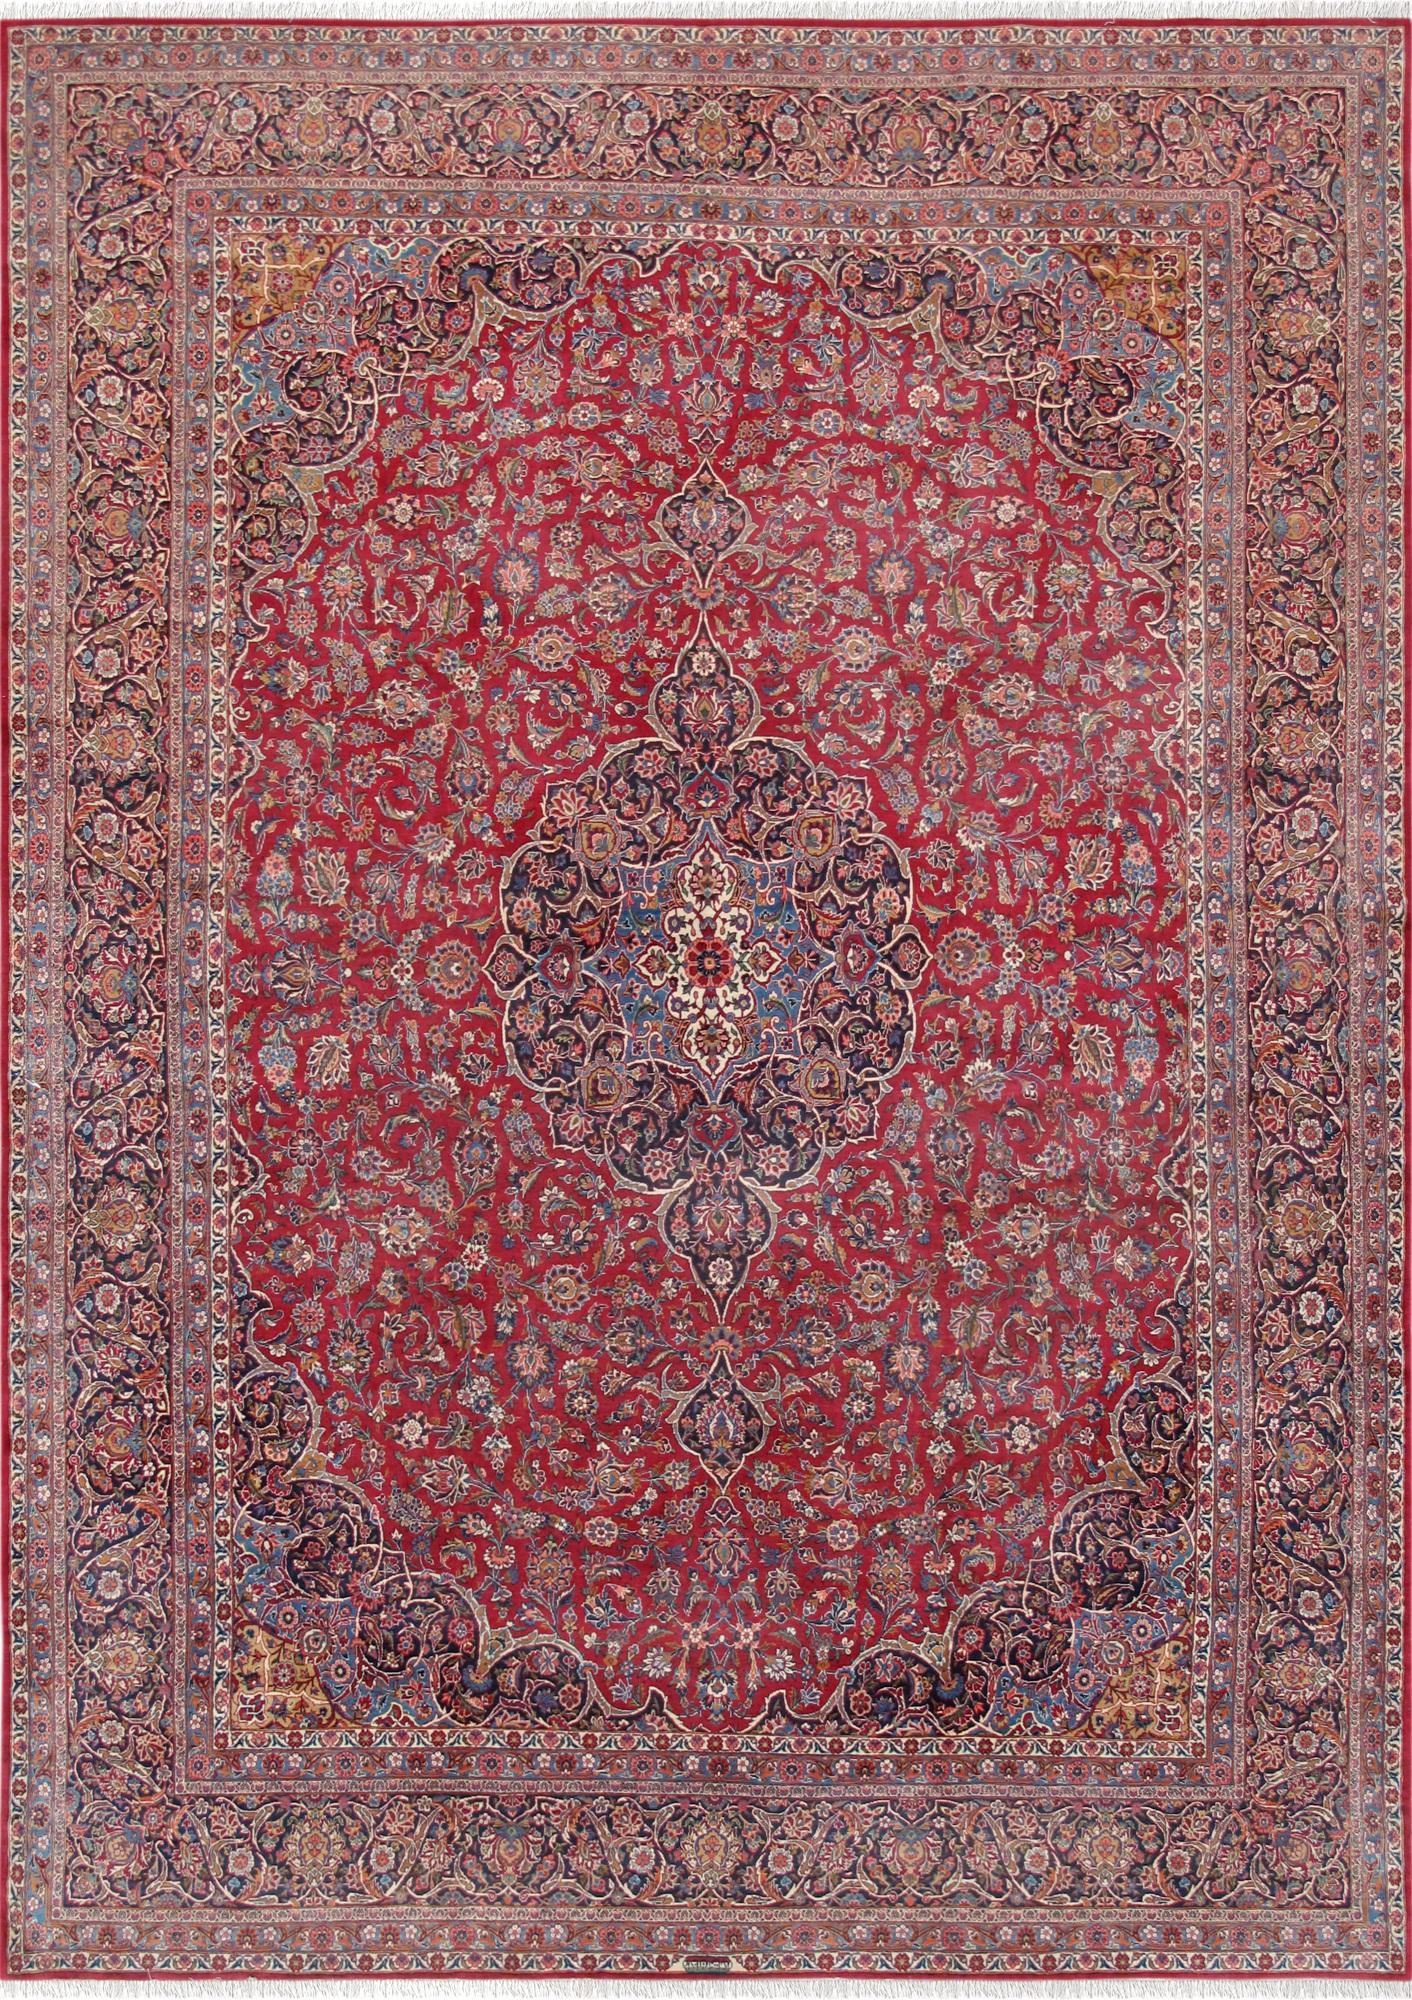 Azerbaijani Pasargad Home Antique Persian Kashan 10 ft 7 in x 15 ft For Sale